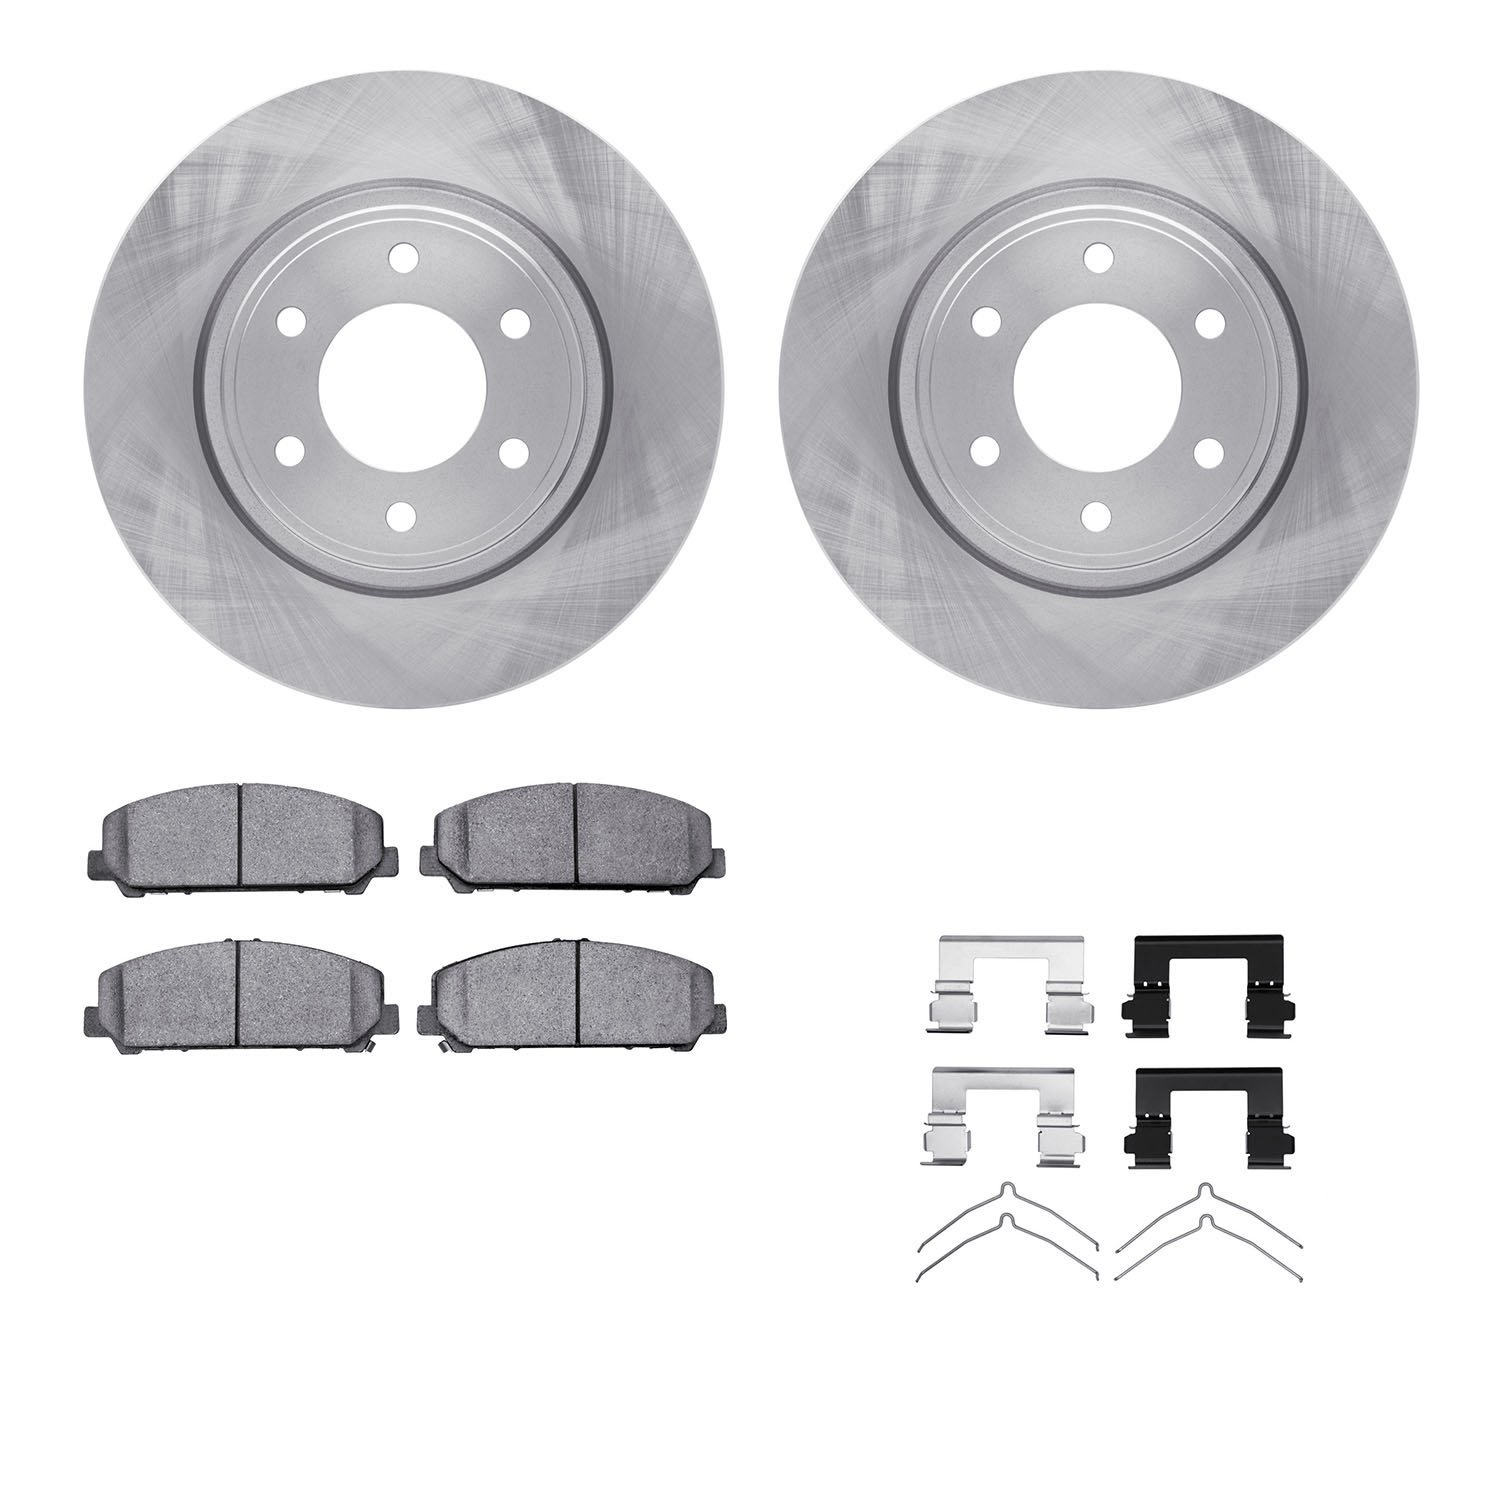 6412-68001 Brake Rotors with Ultimate-Duty Brake Pads Kit & Hardware, Fits Select Infiniti/Nissan, Position: Front